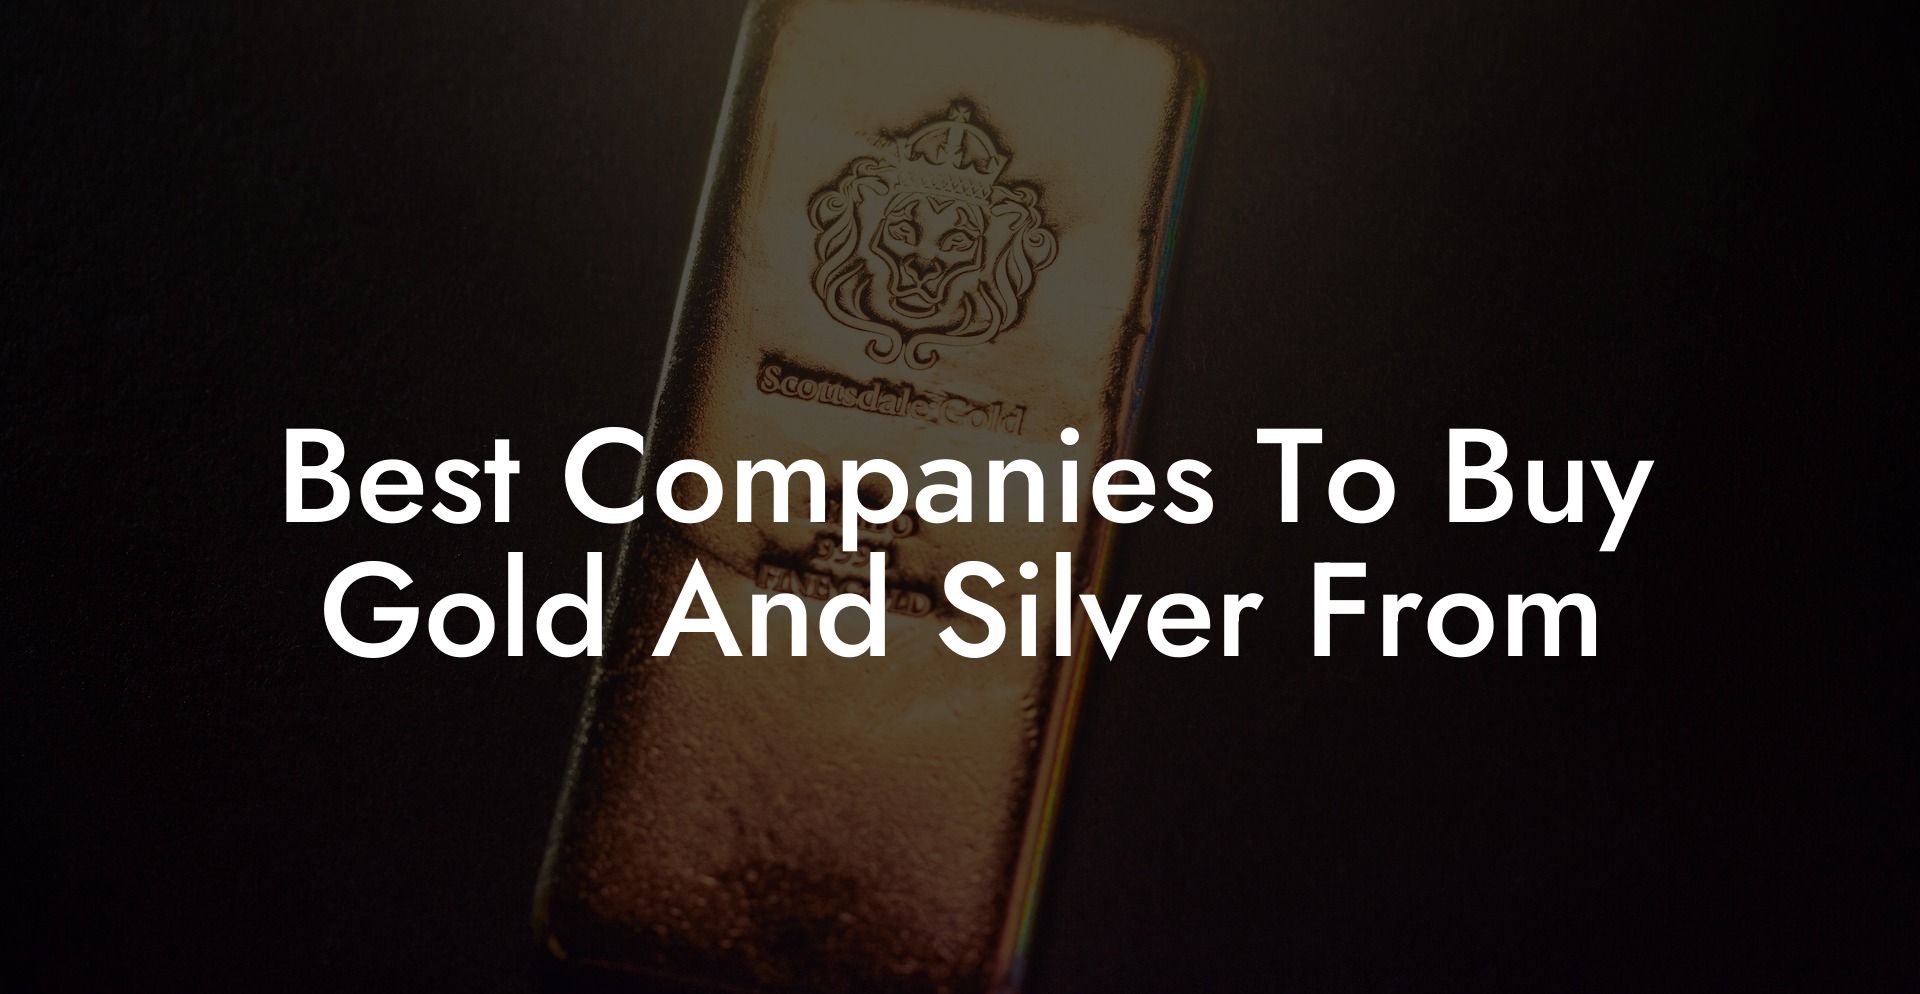 Best Companies To Buy Gold And Silver From